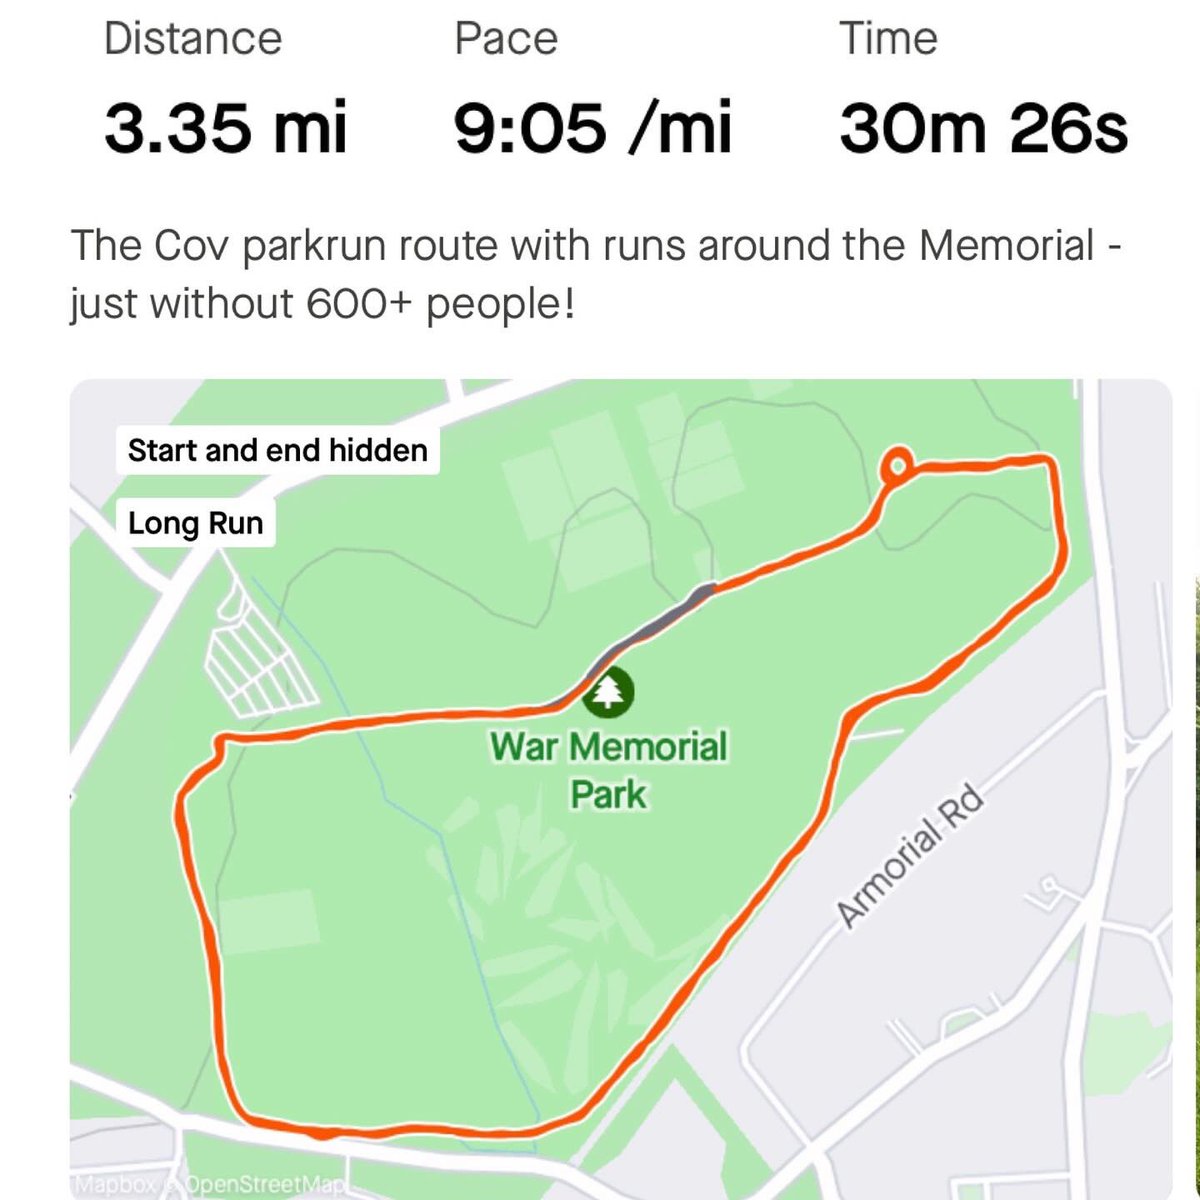 I’m creating @CovMotoFest this weekend so no #Coventry @parkrunUK in the morning for me, so thought I’d do it tonight instead. 

Lovely sunset run around Memorial Park. #Running #couchto5k